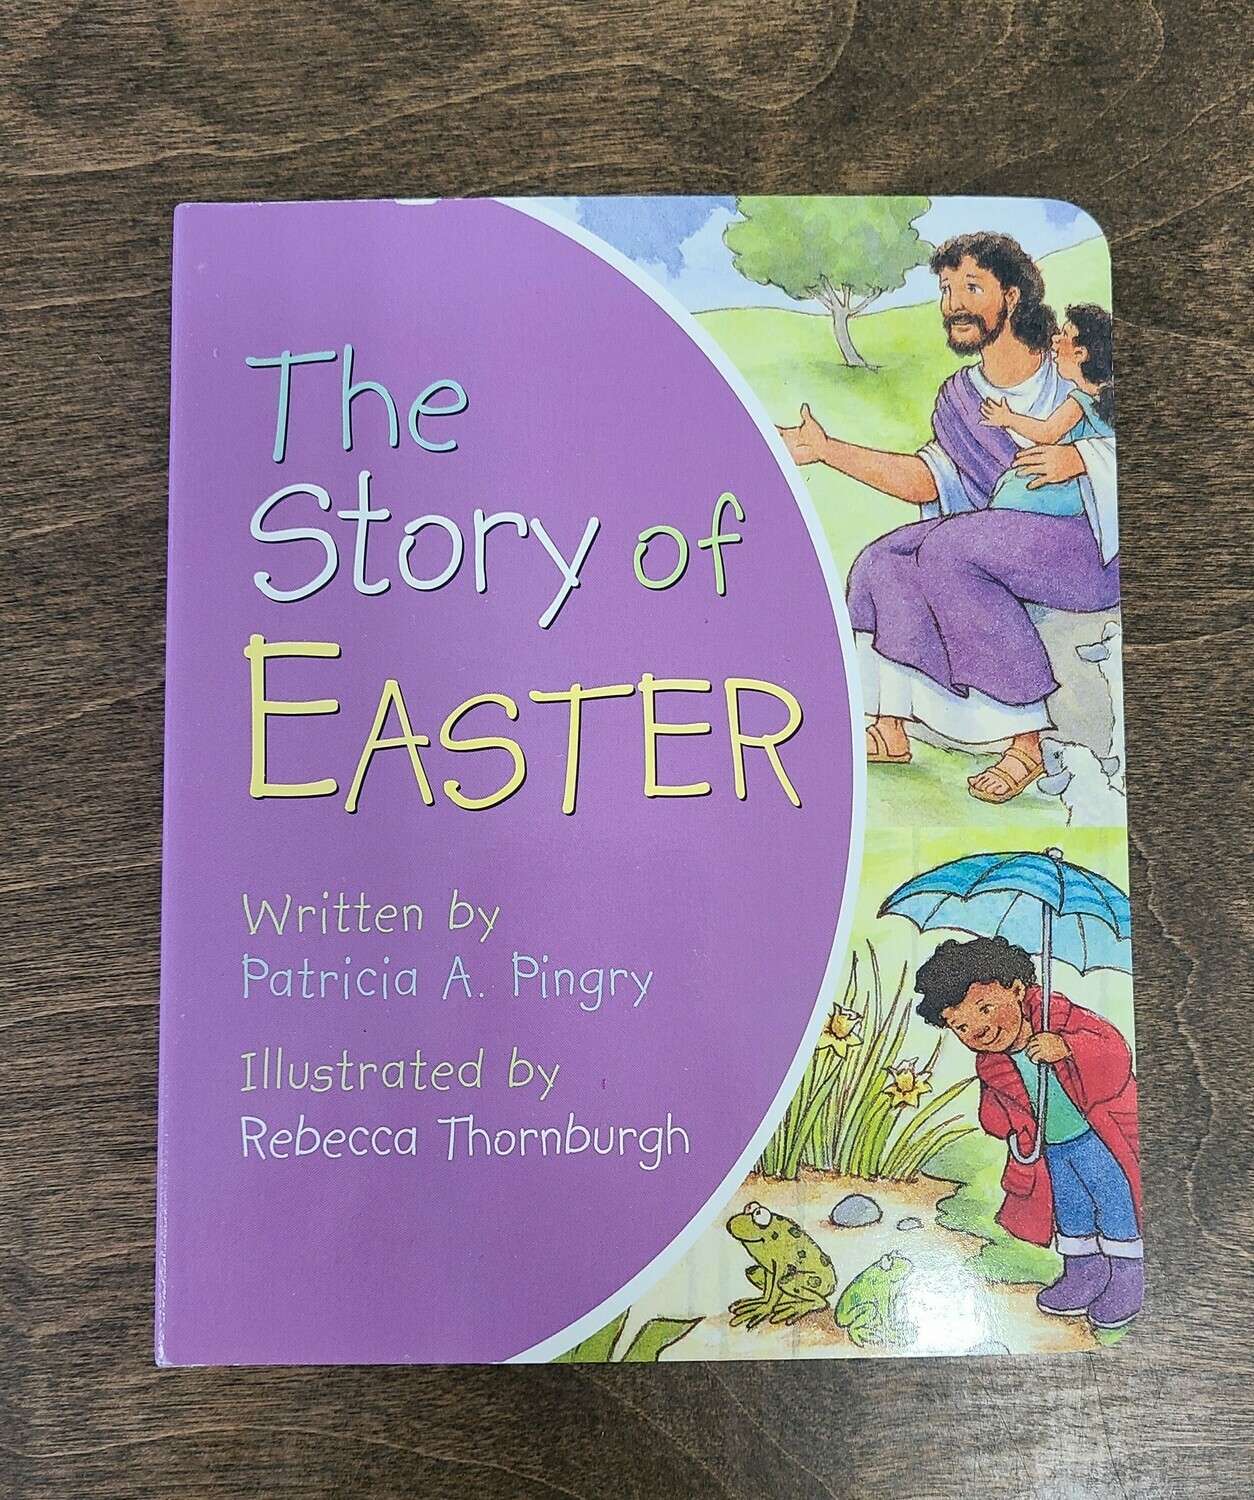 The Story of Easter by Patricia A. Pingry and Rebecca Thornburgh